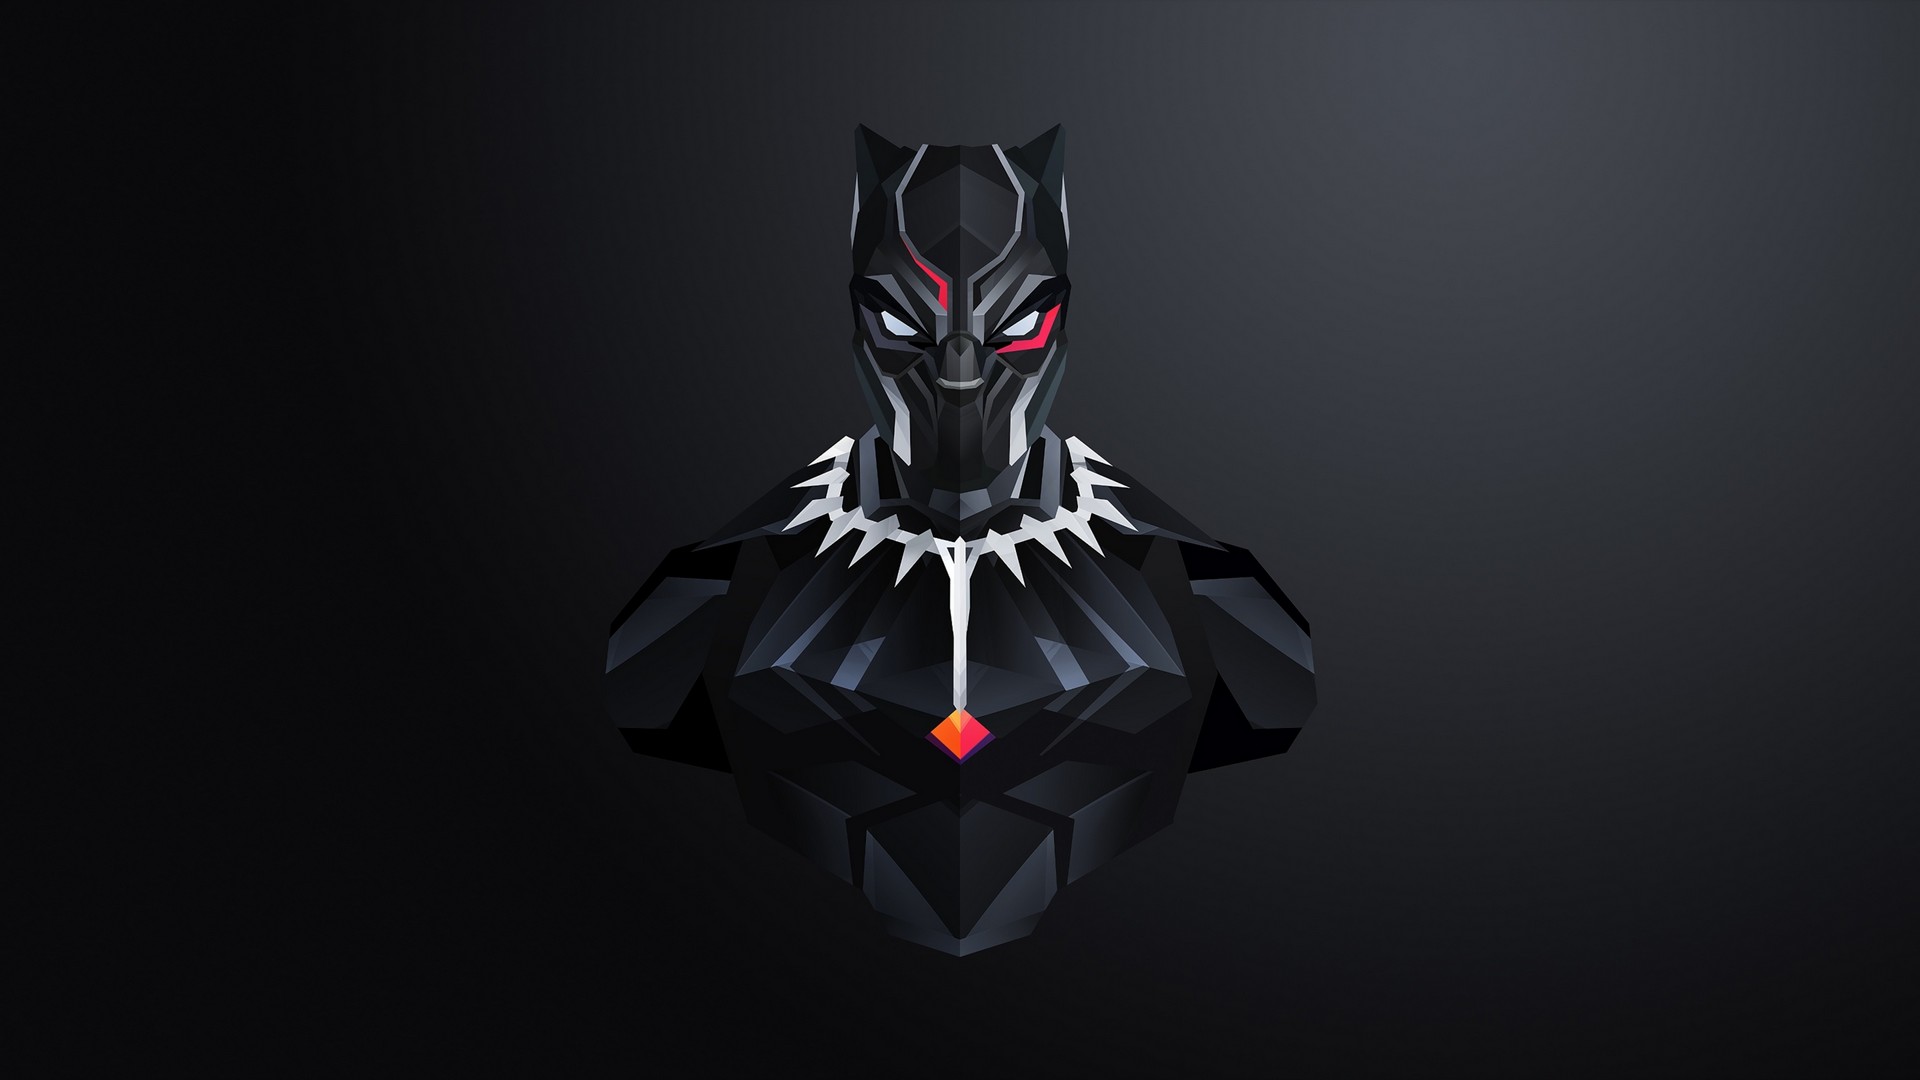 Black Panther Superhero Movie Wallpaper with high-resolution 1920x1080 pixel. You can use this poster wallpaper for your Desktop Computers, Mac Screensavers, Windows Backgrounds, iPhone Wallpapers, Tablet or Android Lock screen and another Mobile device